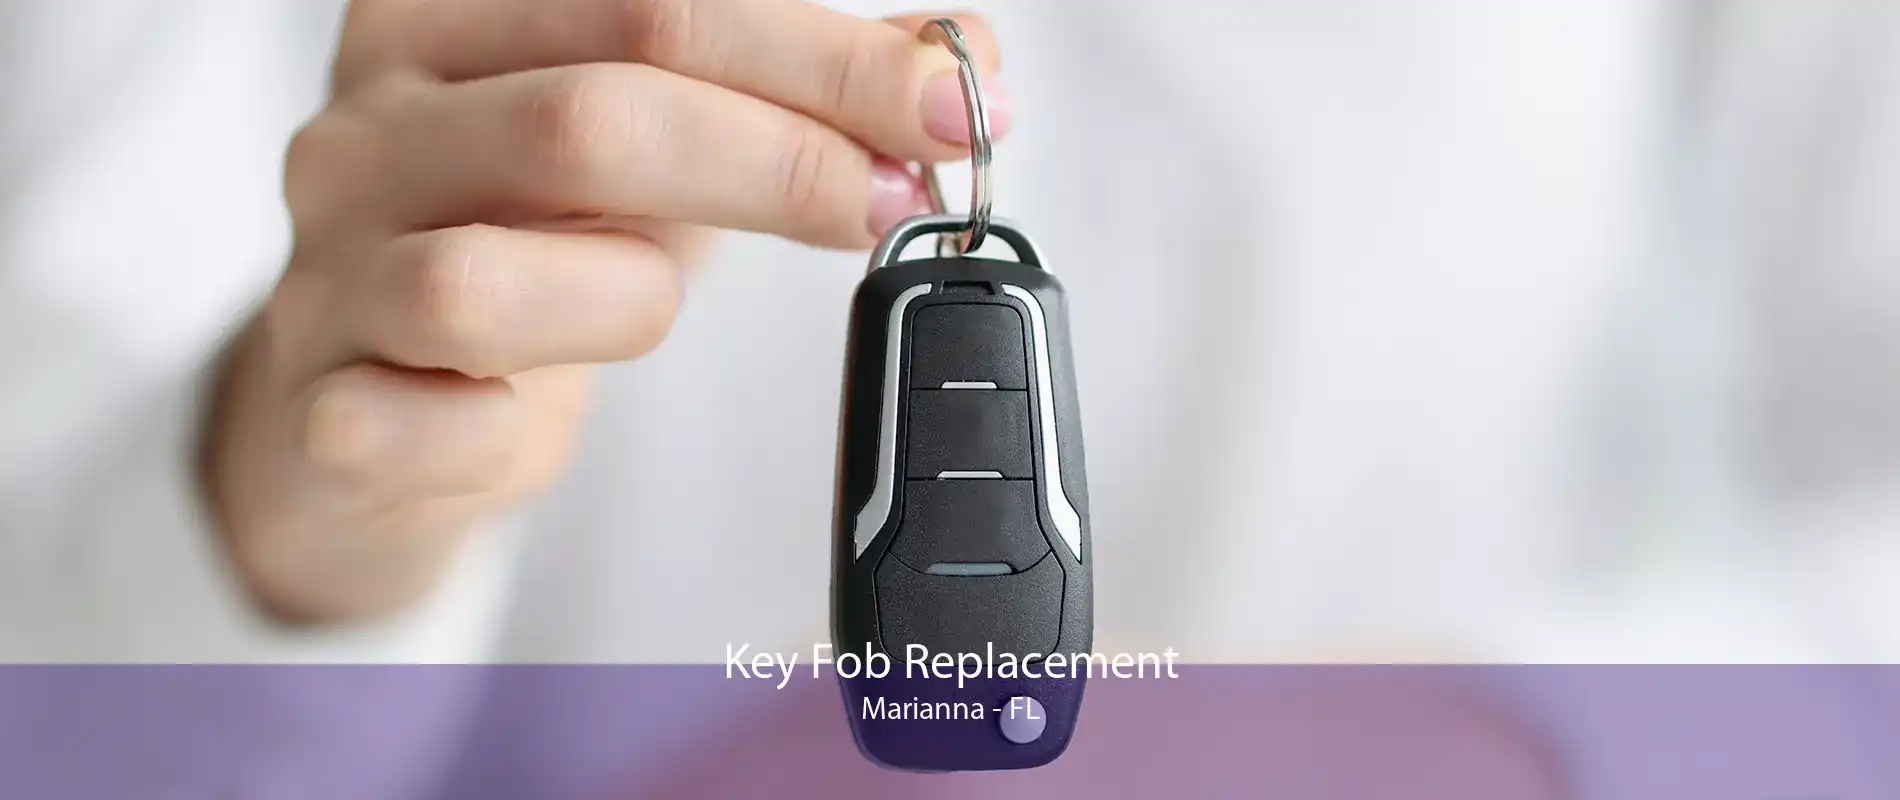 Key Fob Replacement Marianna - FL